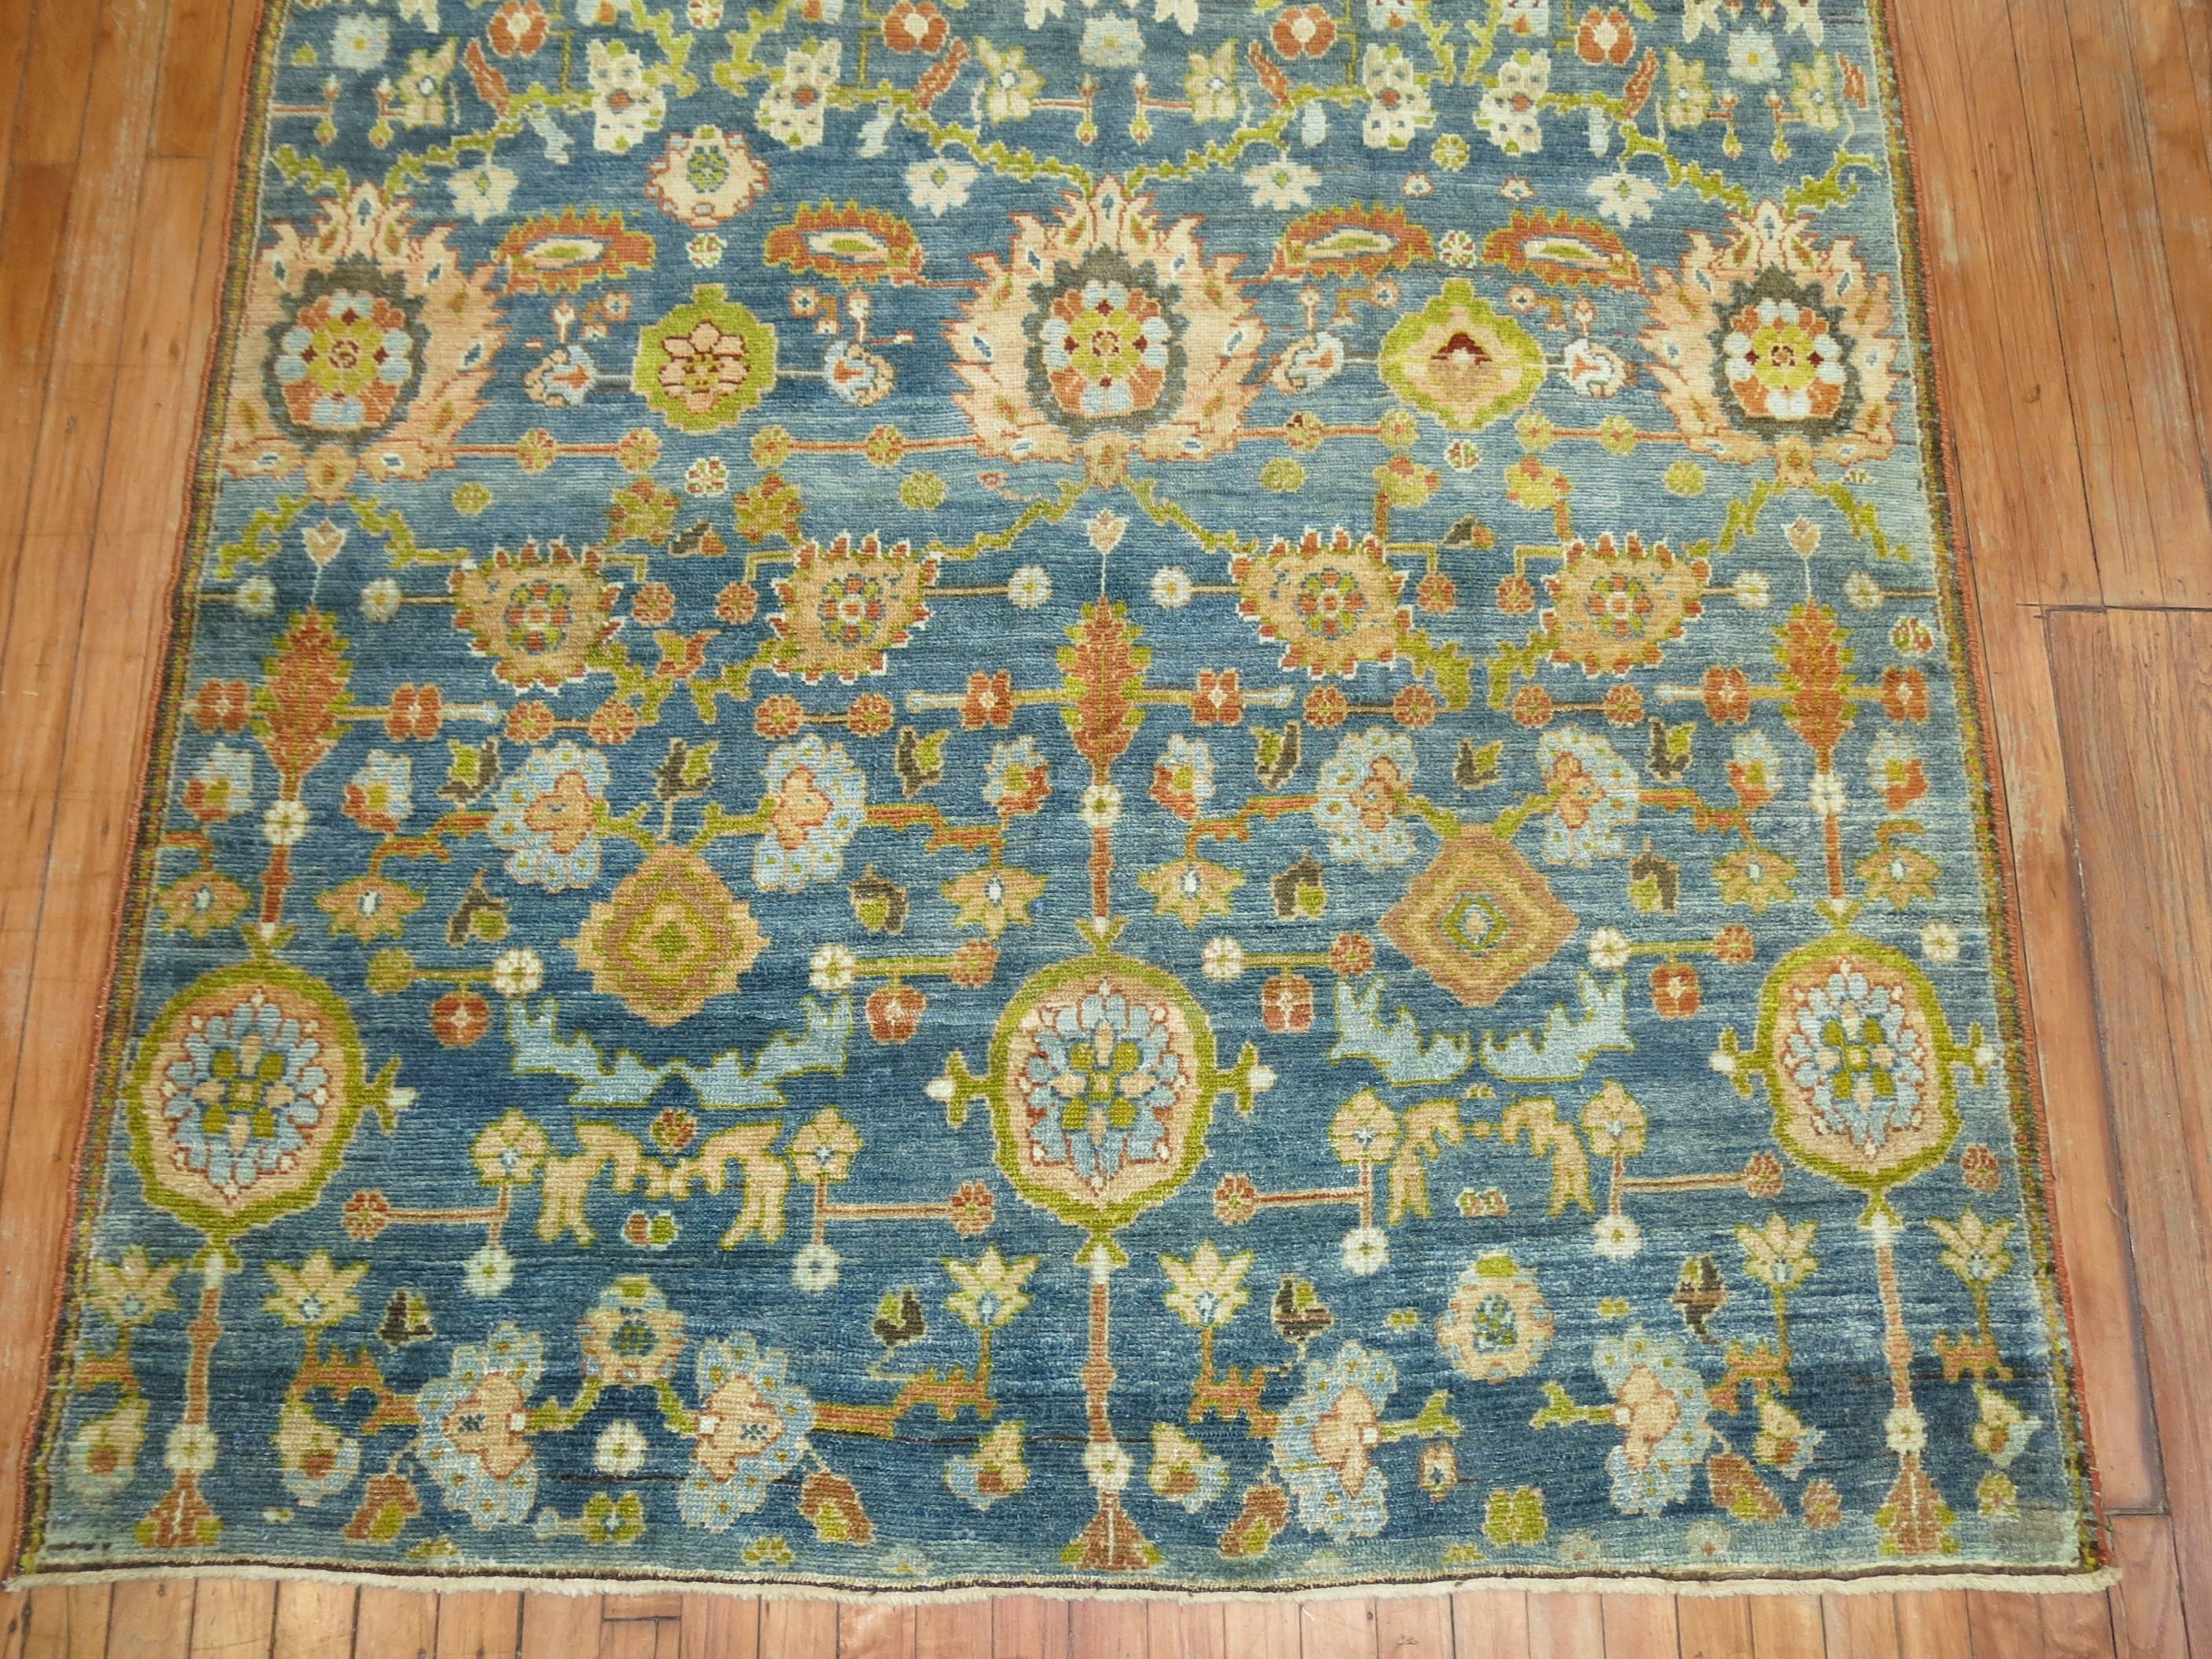 A Persian Malayer gallery rug featured a large-scale colorful all-over design.

5'1'' x 14'1''